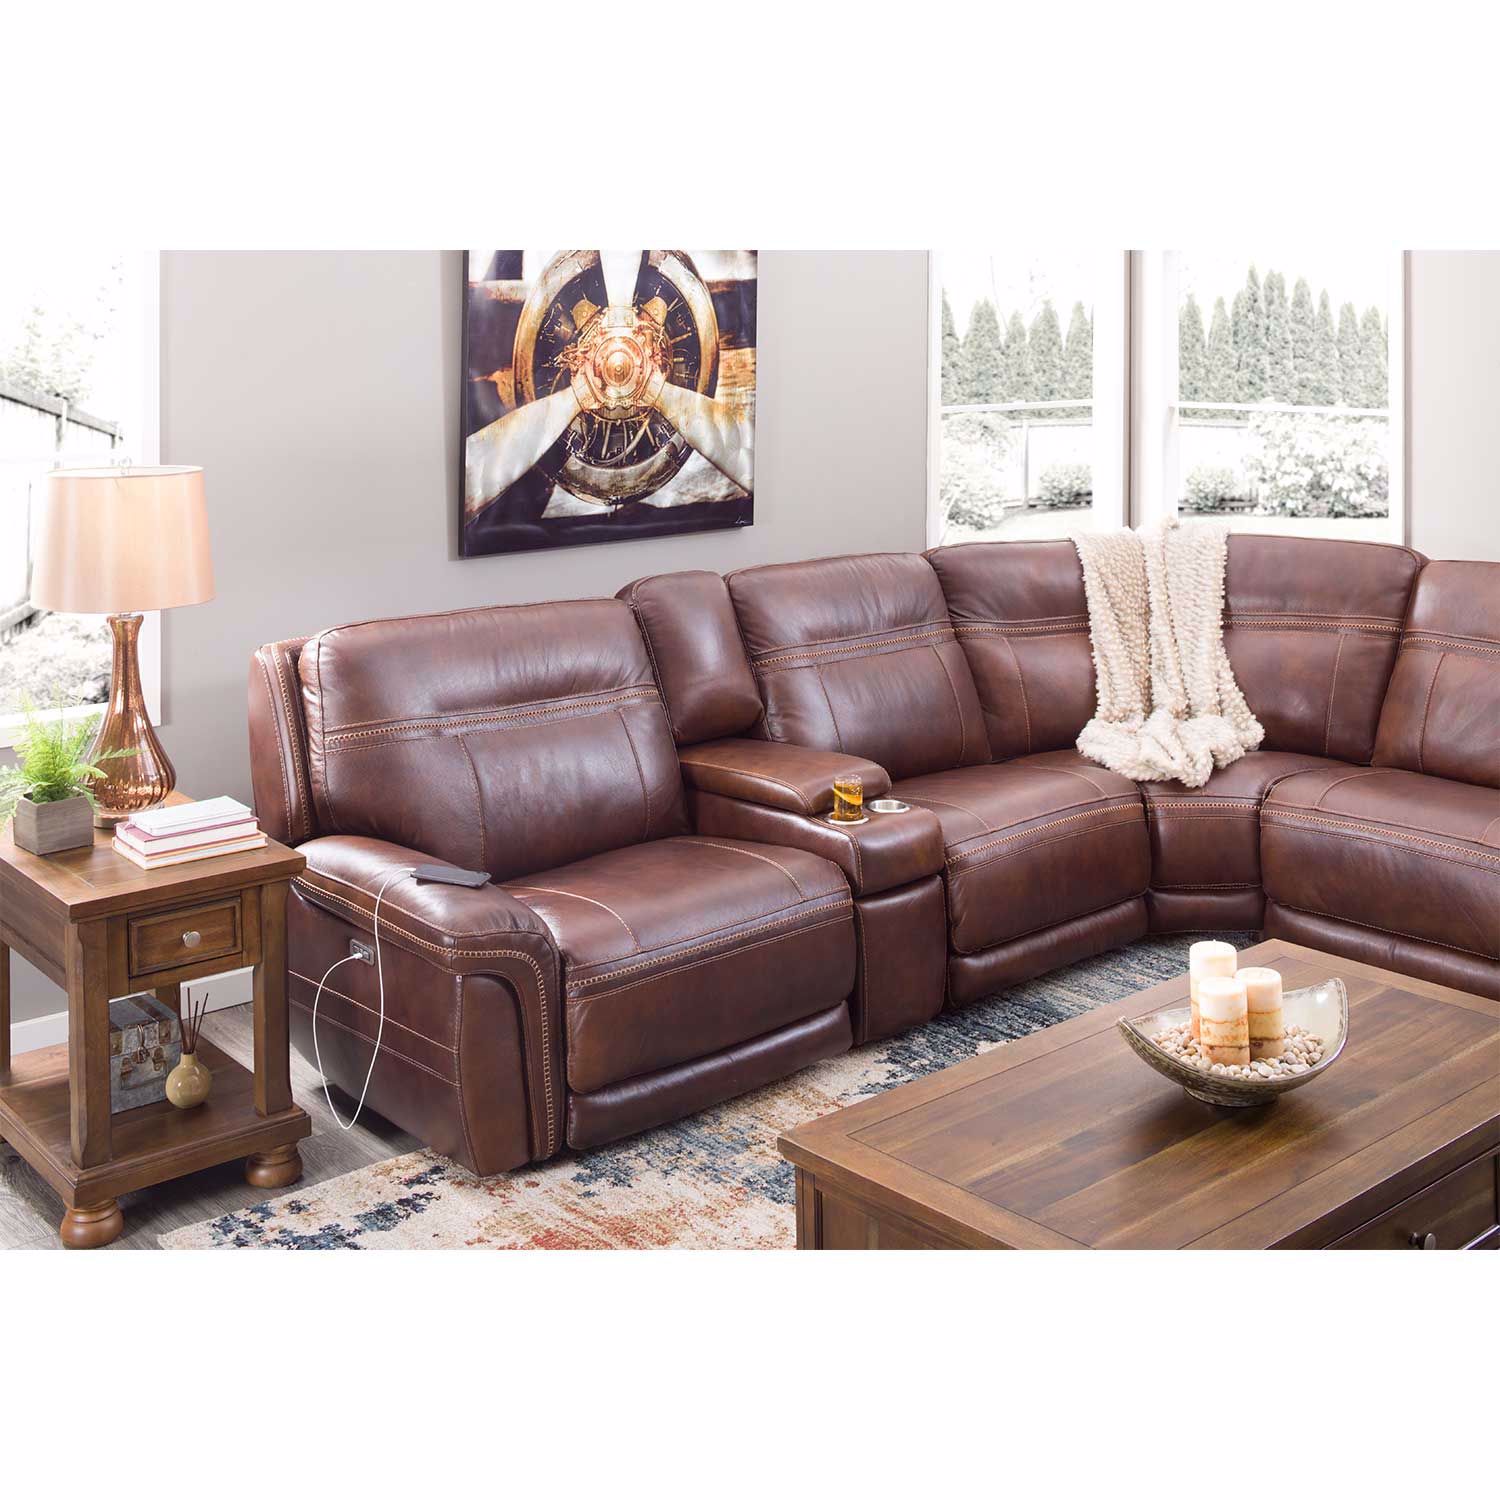 0115847 Dean 6 Piece Leather Power Reclining Sectional With Adjustable Headrests 